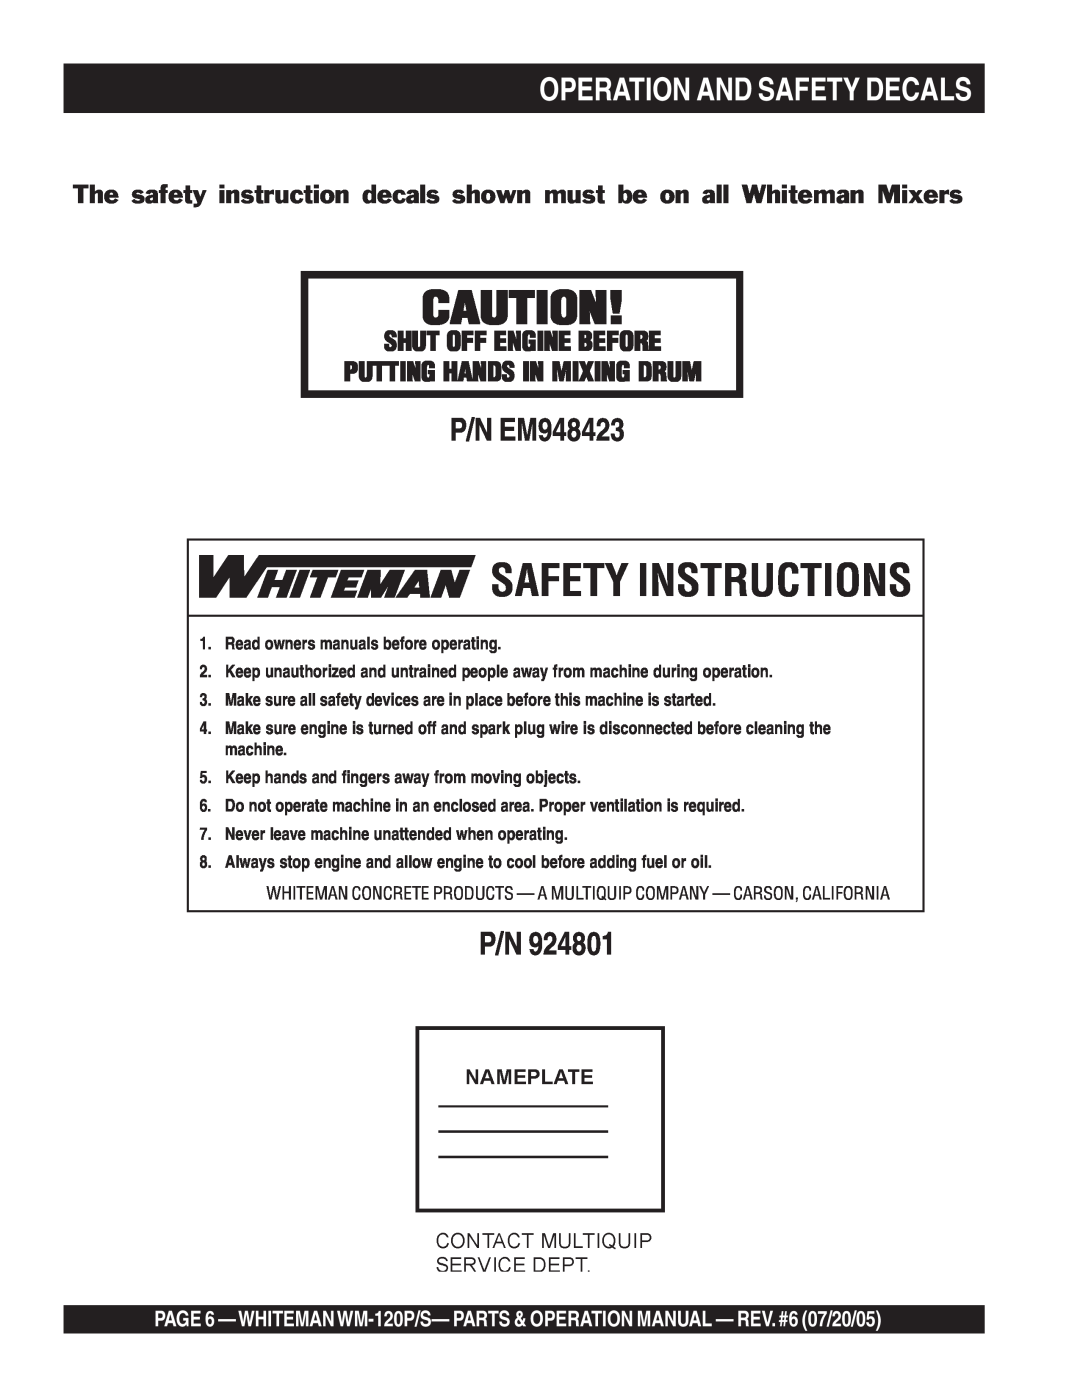 Multiquip WM-120PM operation manual Operation And Safety Decals, Safety Instructions, P/N EM948423 